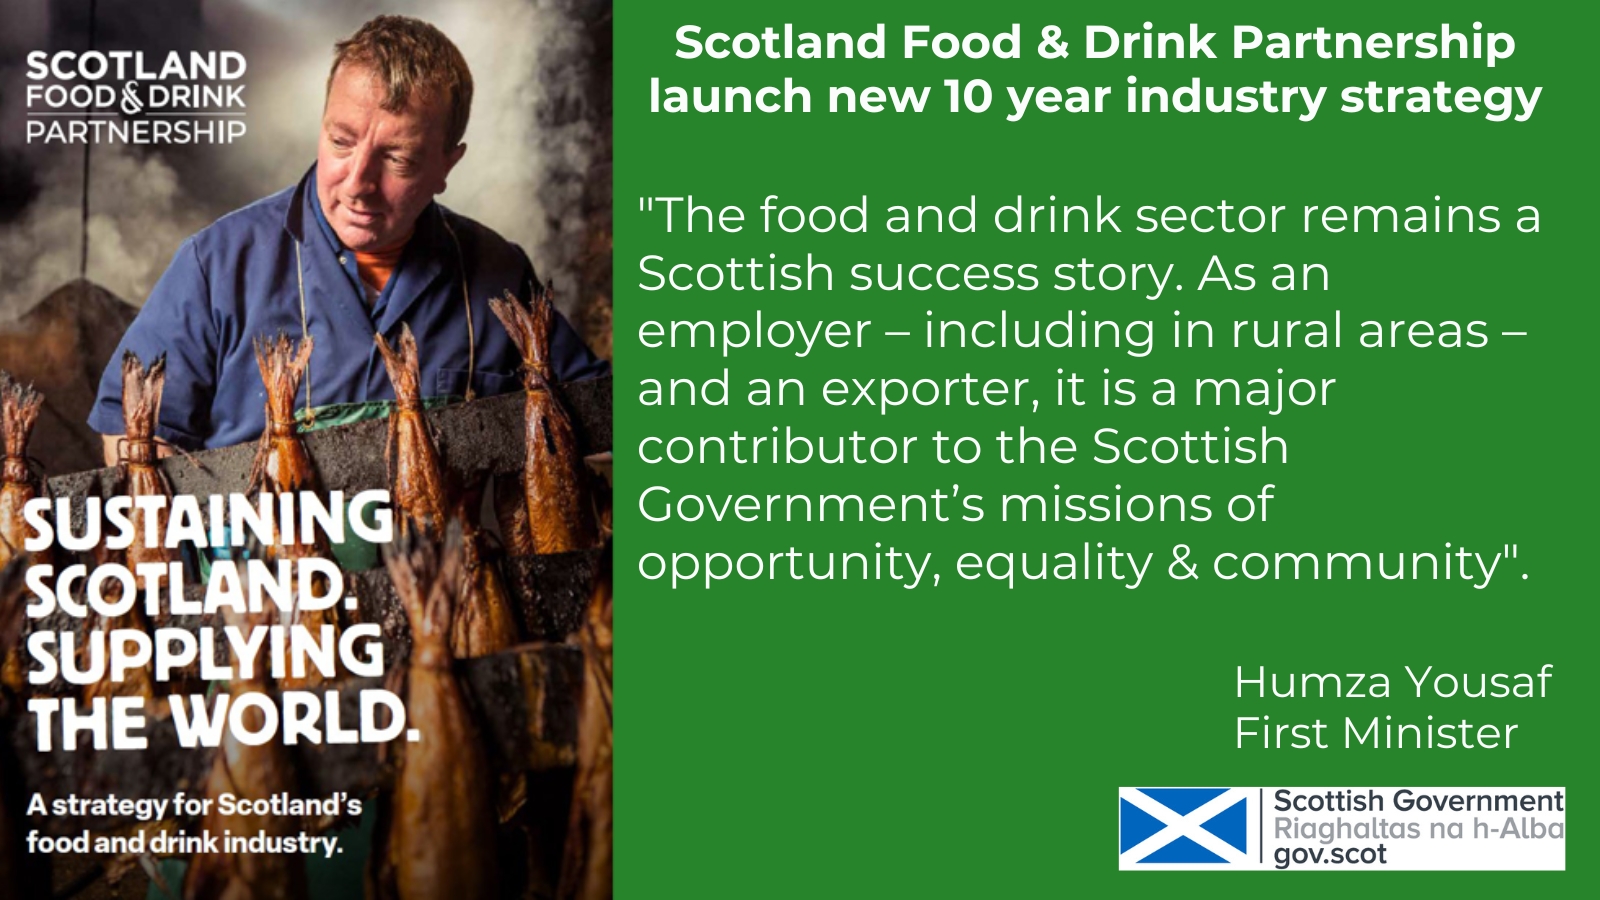 Sustaining Scotland, Supplying the World: a strategy for Scotland’s food and drink industry infographic